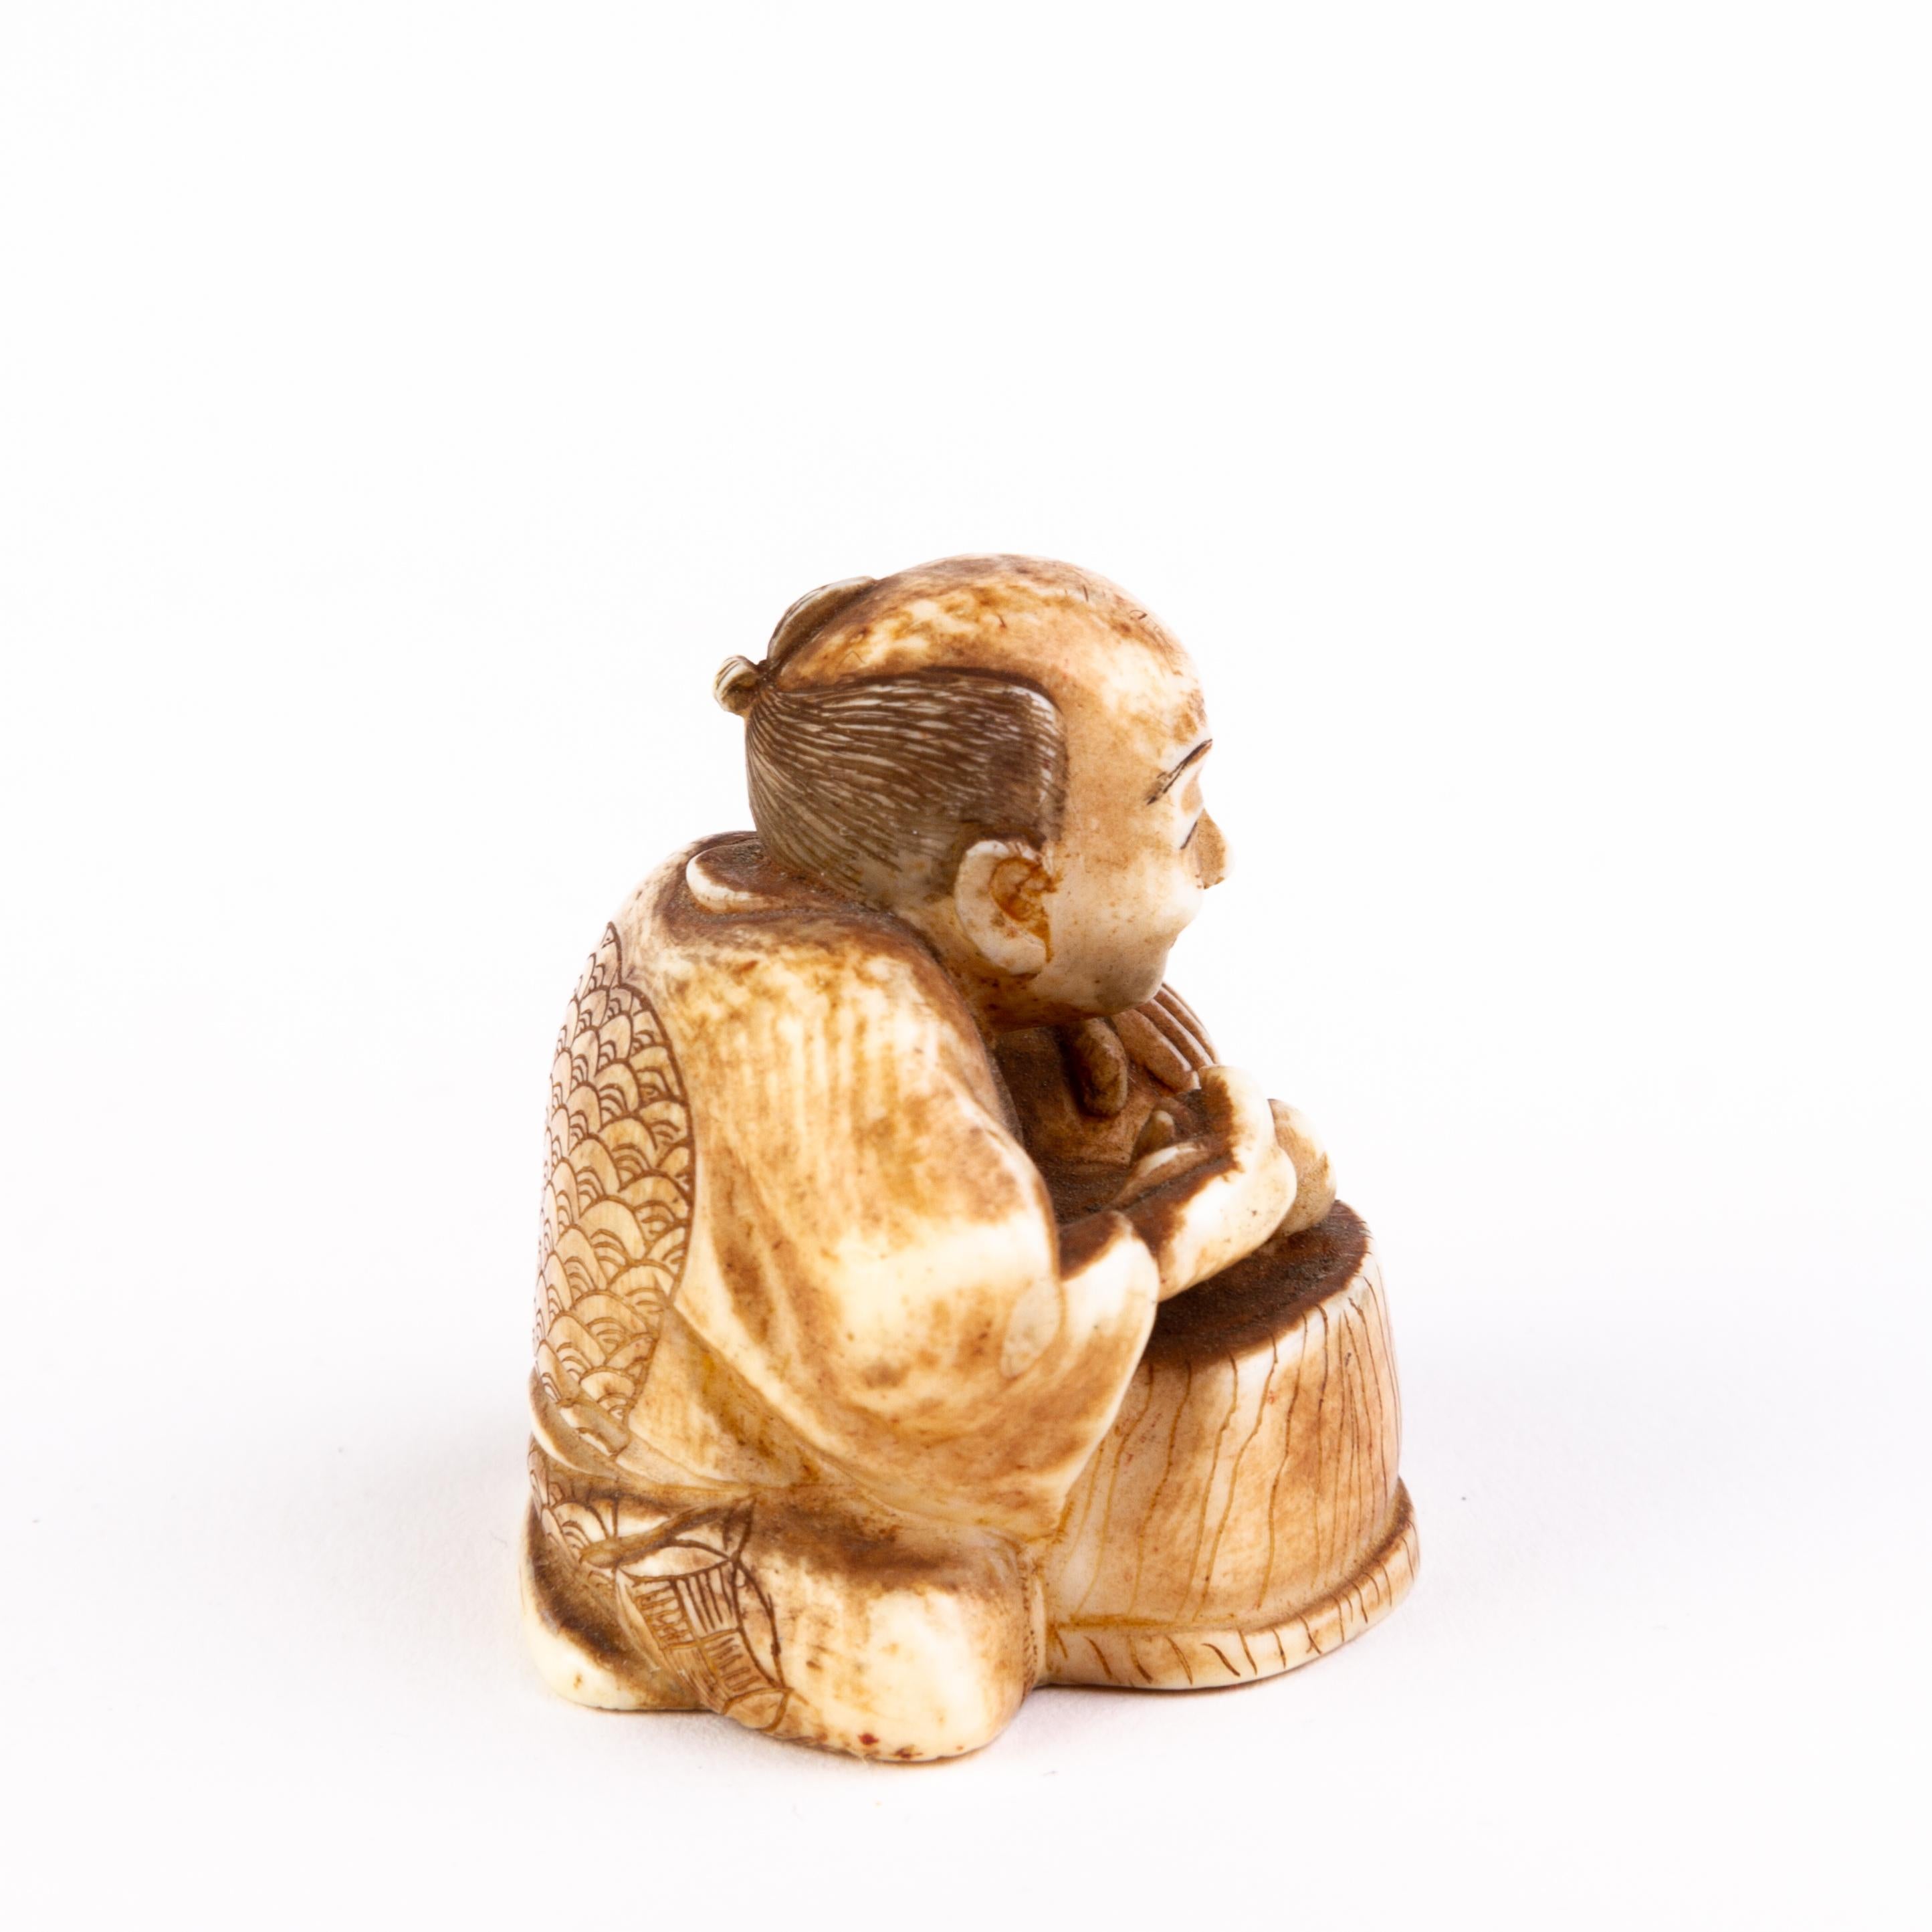 In good condition
From a private collection
Free international shipping
Signed Japanese Carved Netsuke Inro Man Cooking